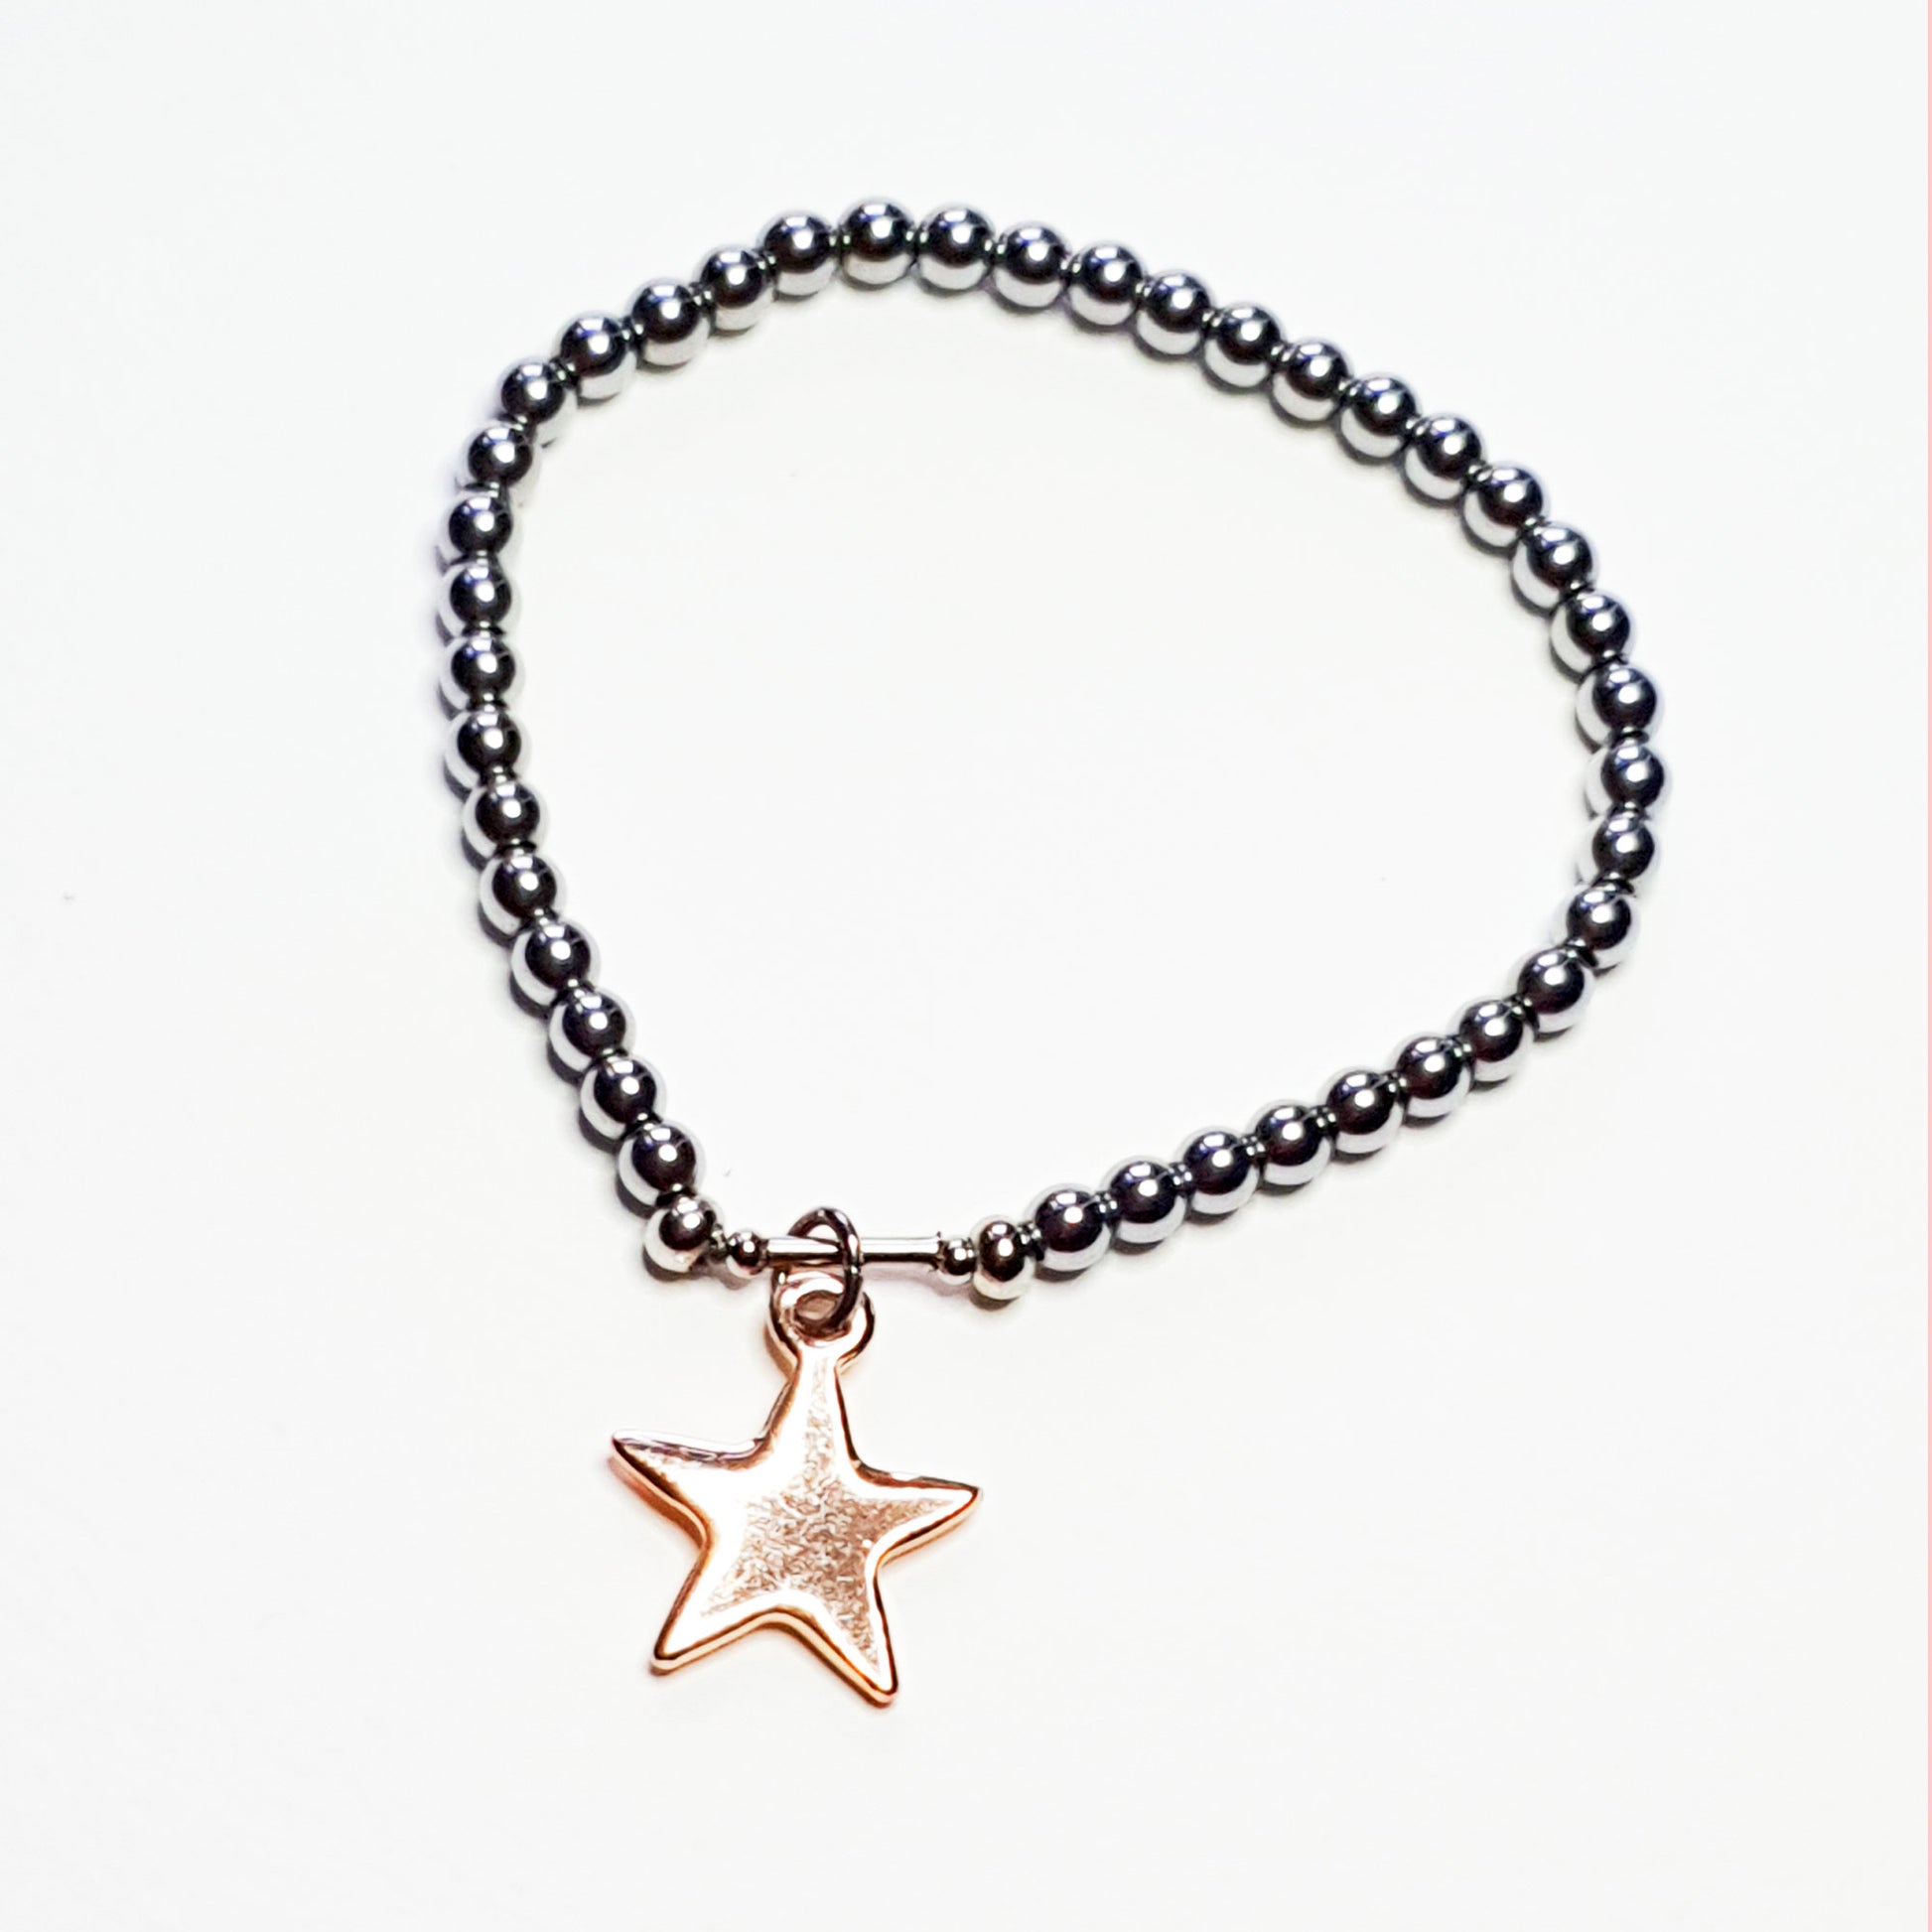 Star charm on an elasticated band of hematine